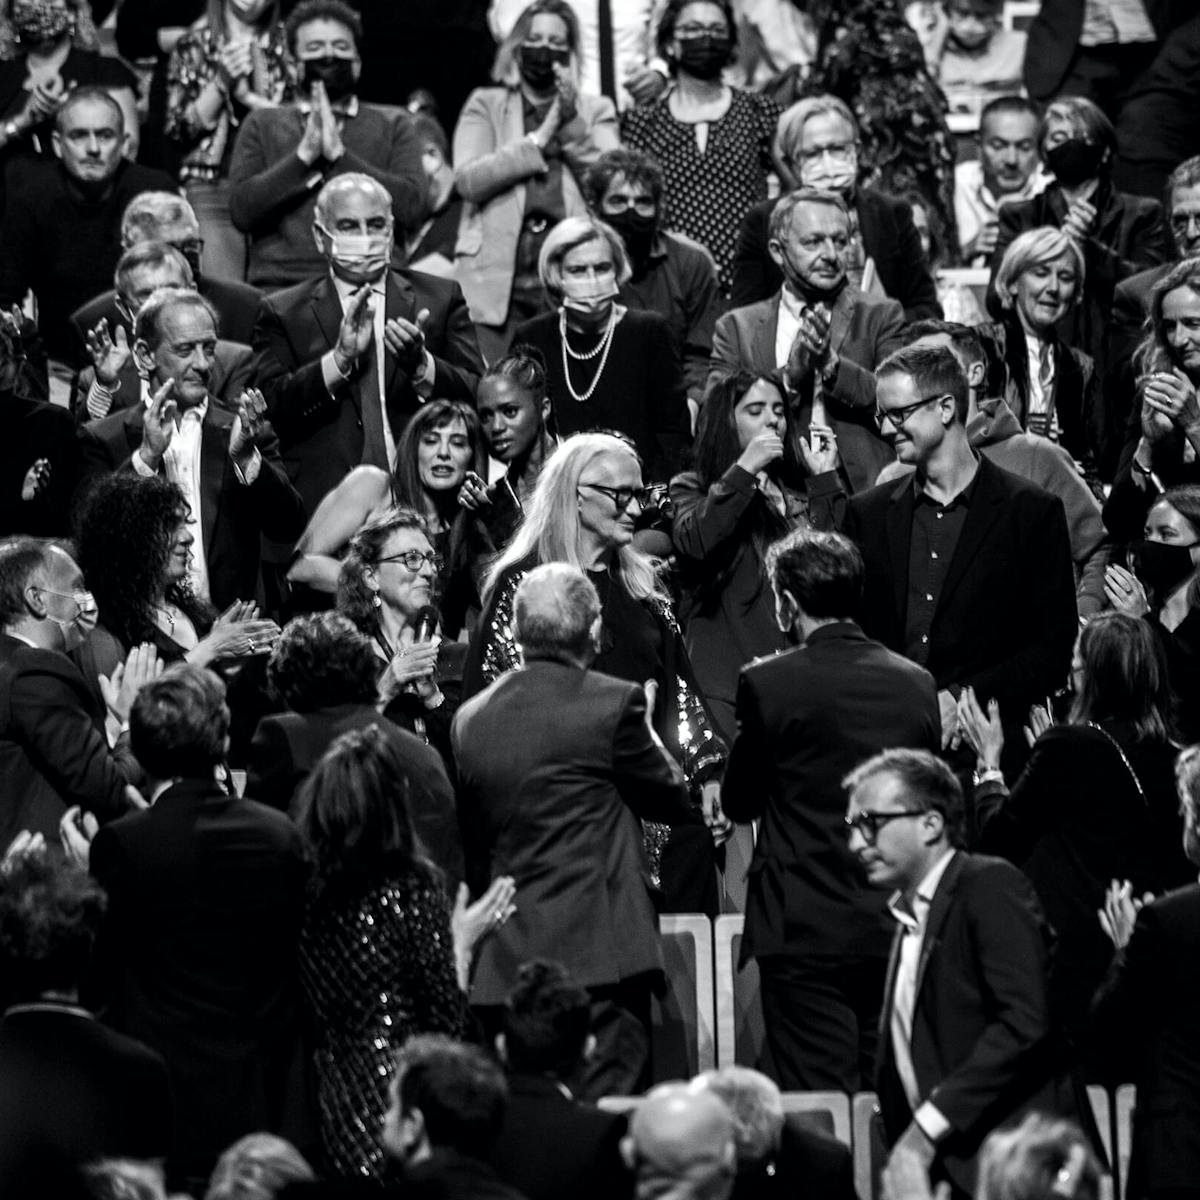 Jane Campion glows like the goddess she is in a sea of people clapping, smiling and cheering her on in this gorgeous black-and-white shot.